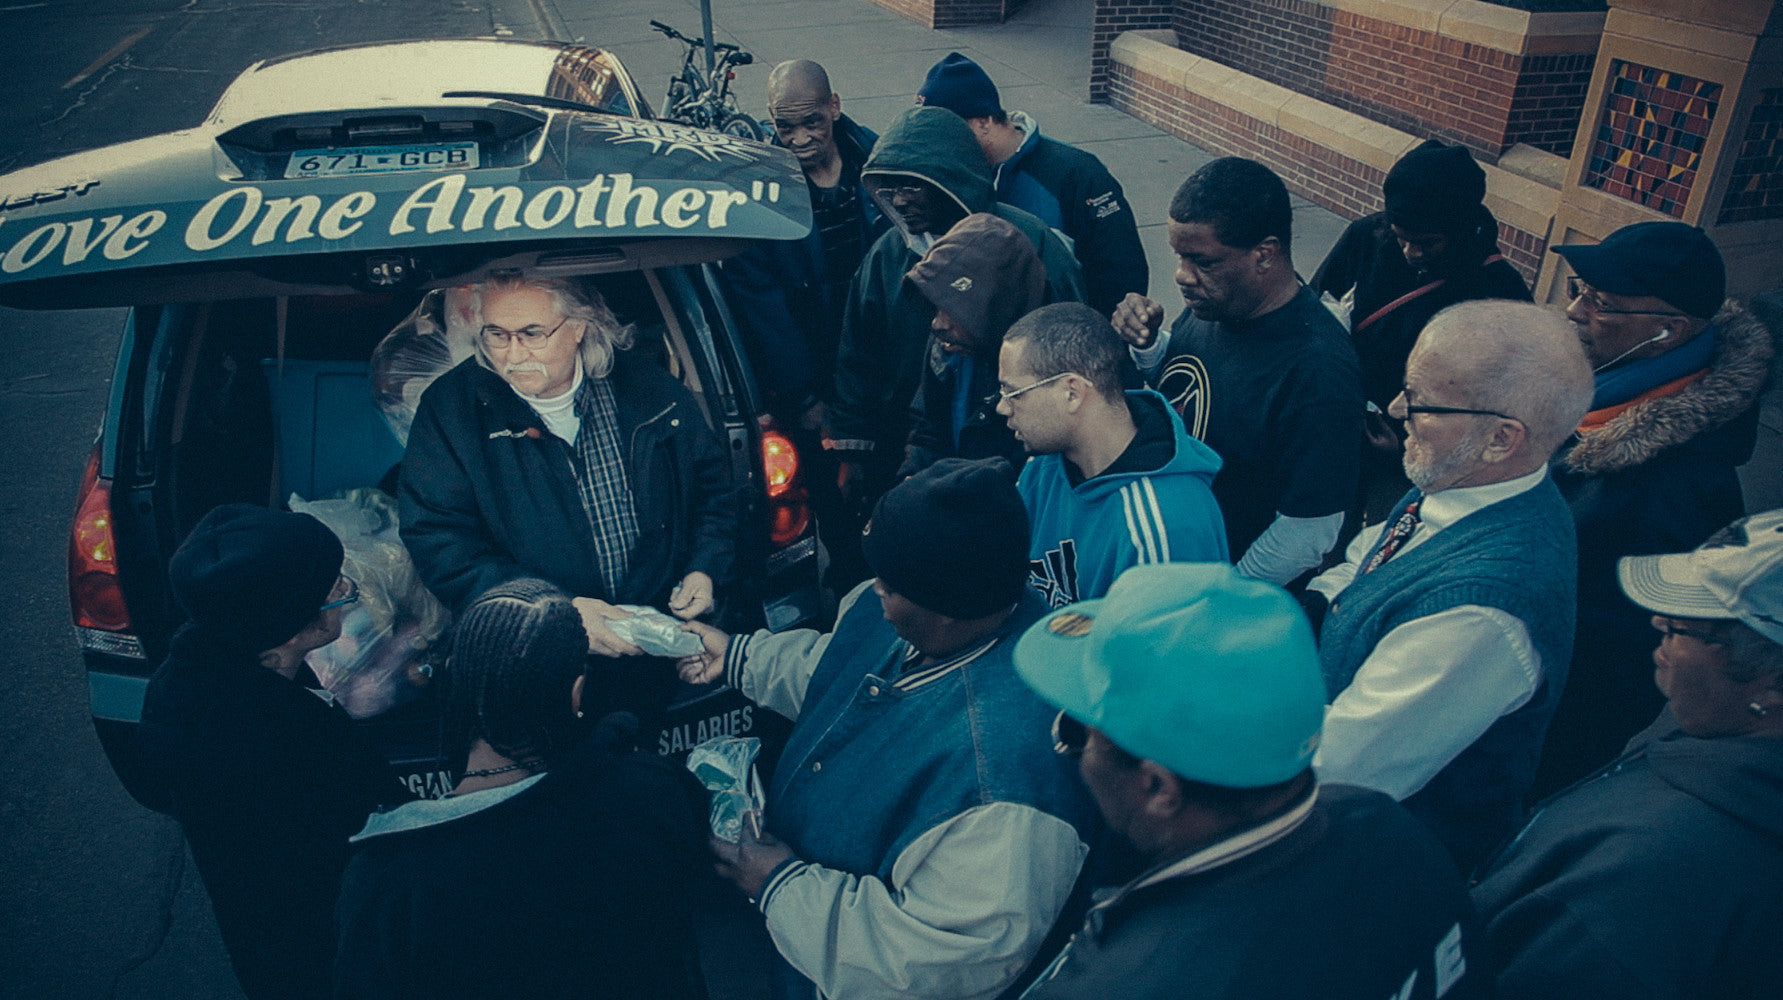 Allan Law in Minneapolis, handing out sandwiches to the hungry.